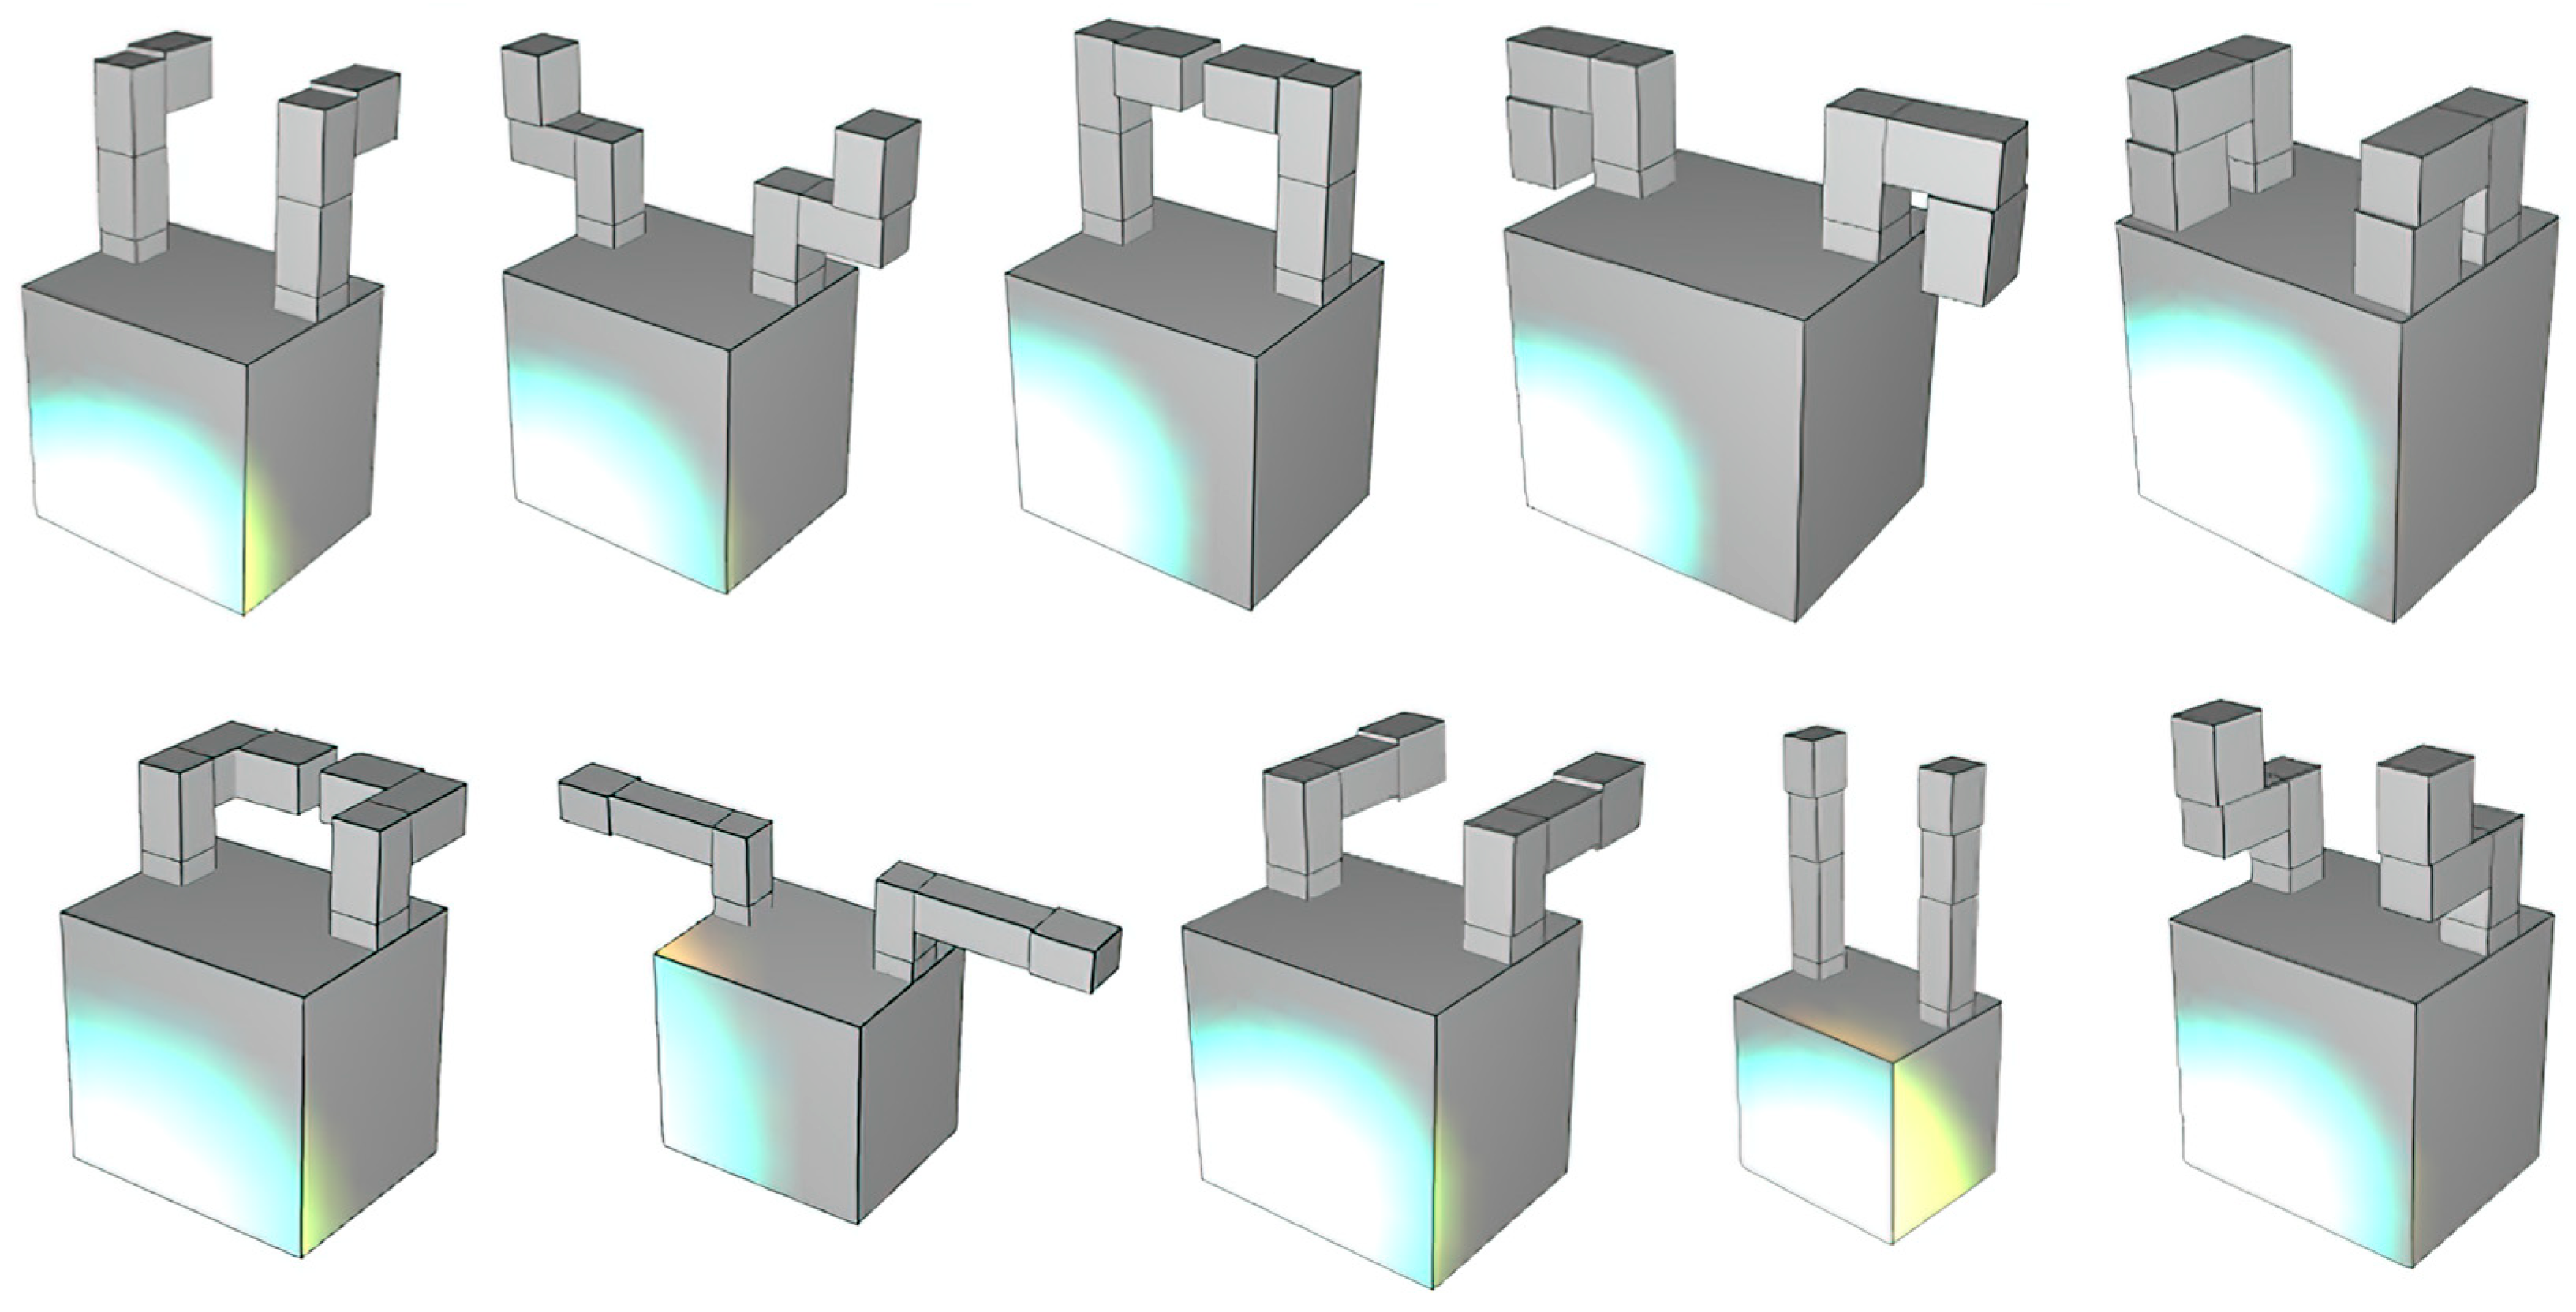 Design of the gripper. (a) Configurations of the gripper. (b) The